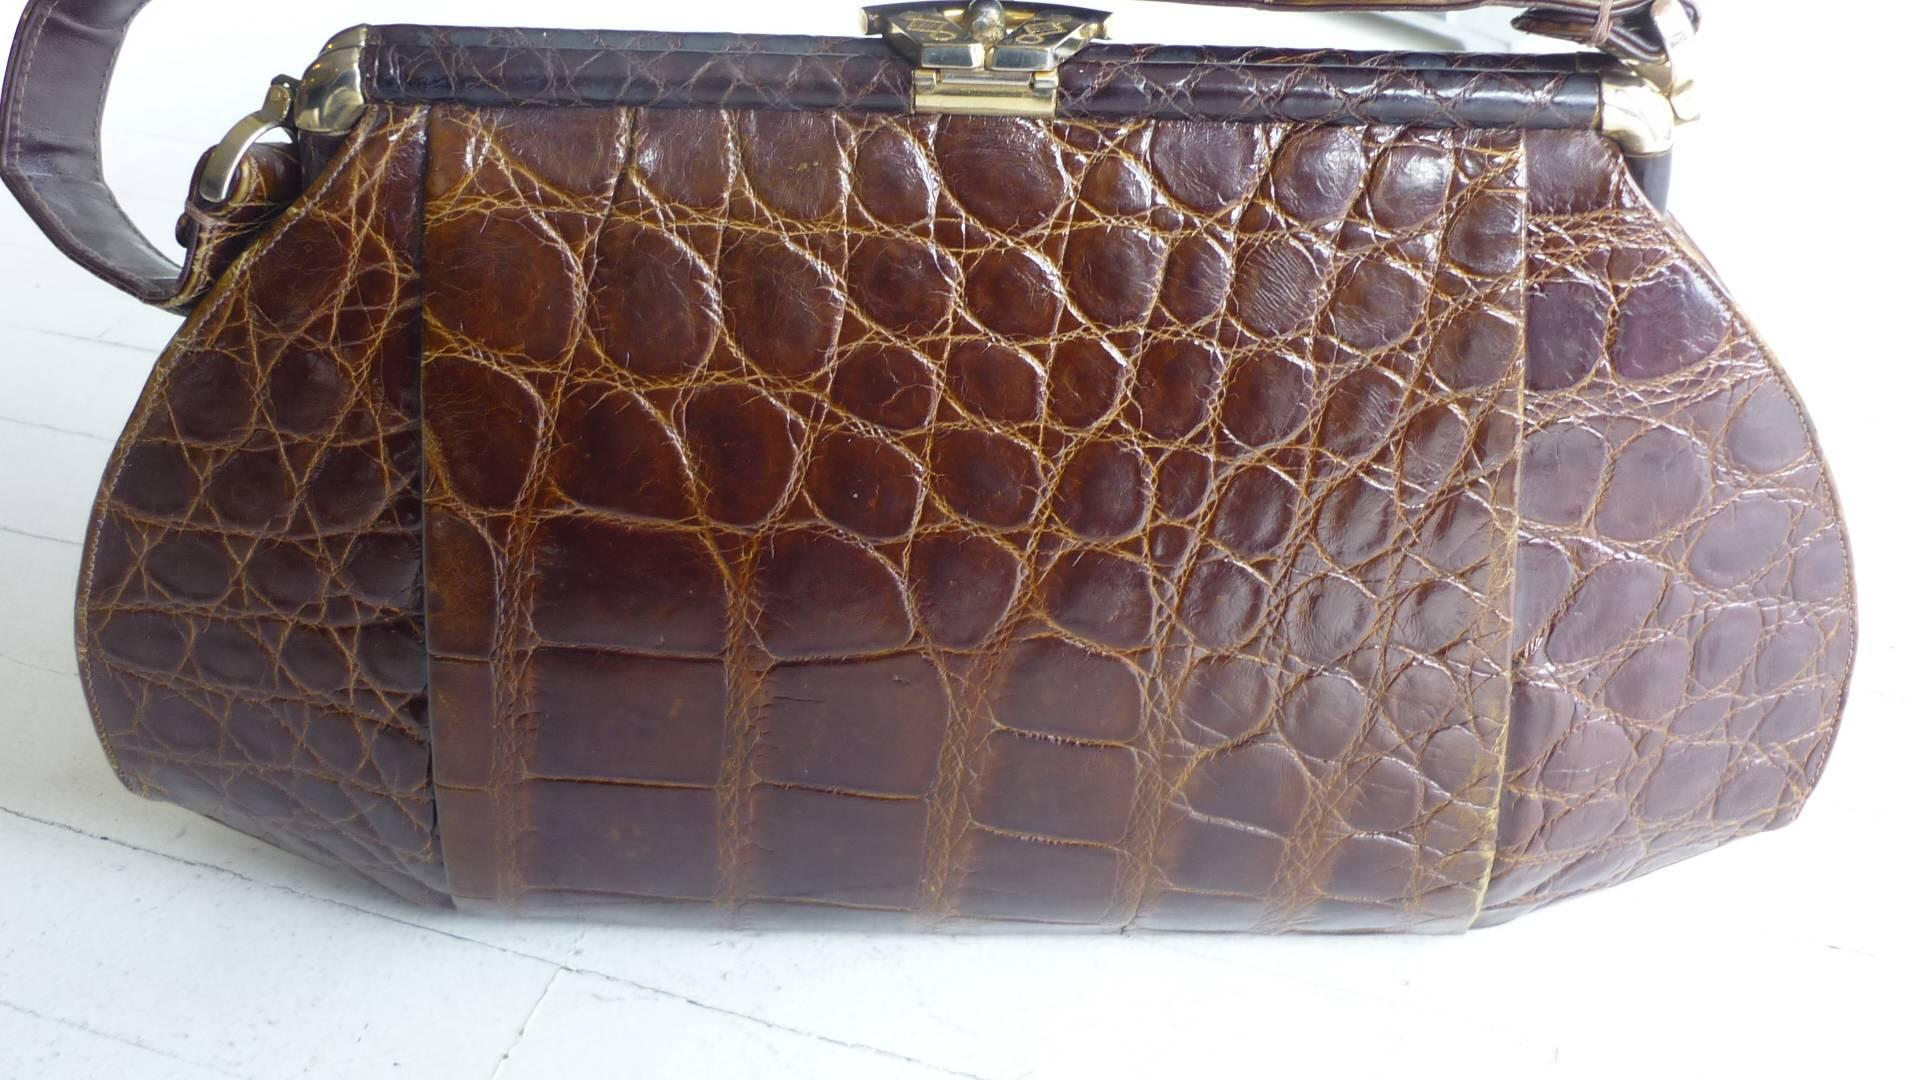 In magnificient condition for any age, this crocodile handbag has very nice hardware including the scythe-like closure mechanism; an unusual oblong shape; beige suede lining in amazing condition with one zippered pocket, and two large and one small